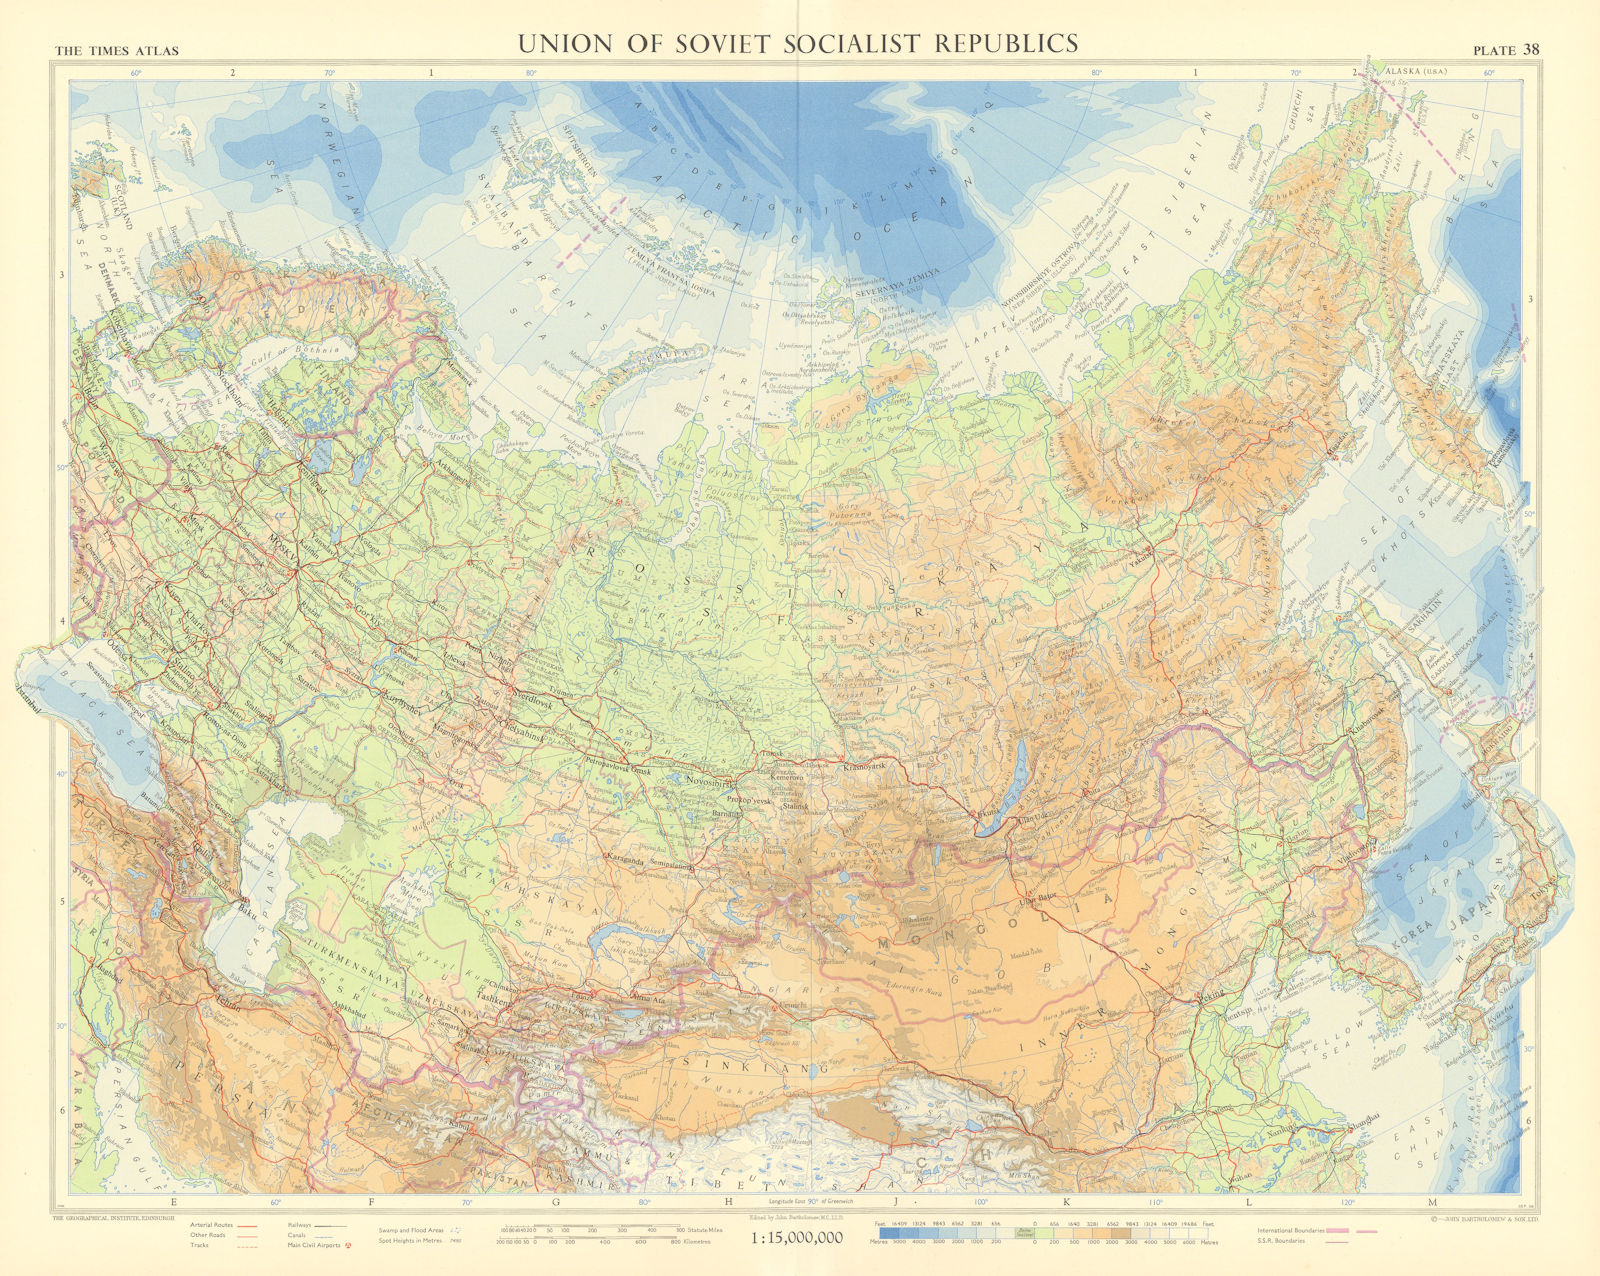 Associate Product Union of Soviet Socialist Republics. Russia USSR. TIMES 1959 old vintage map